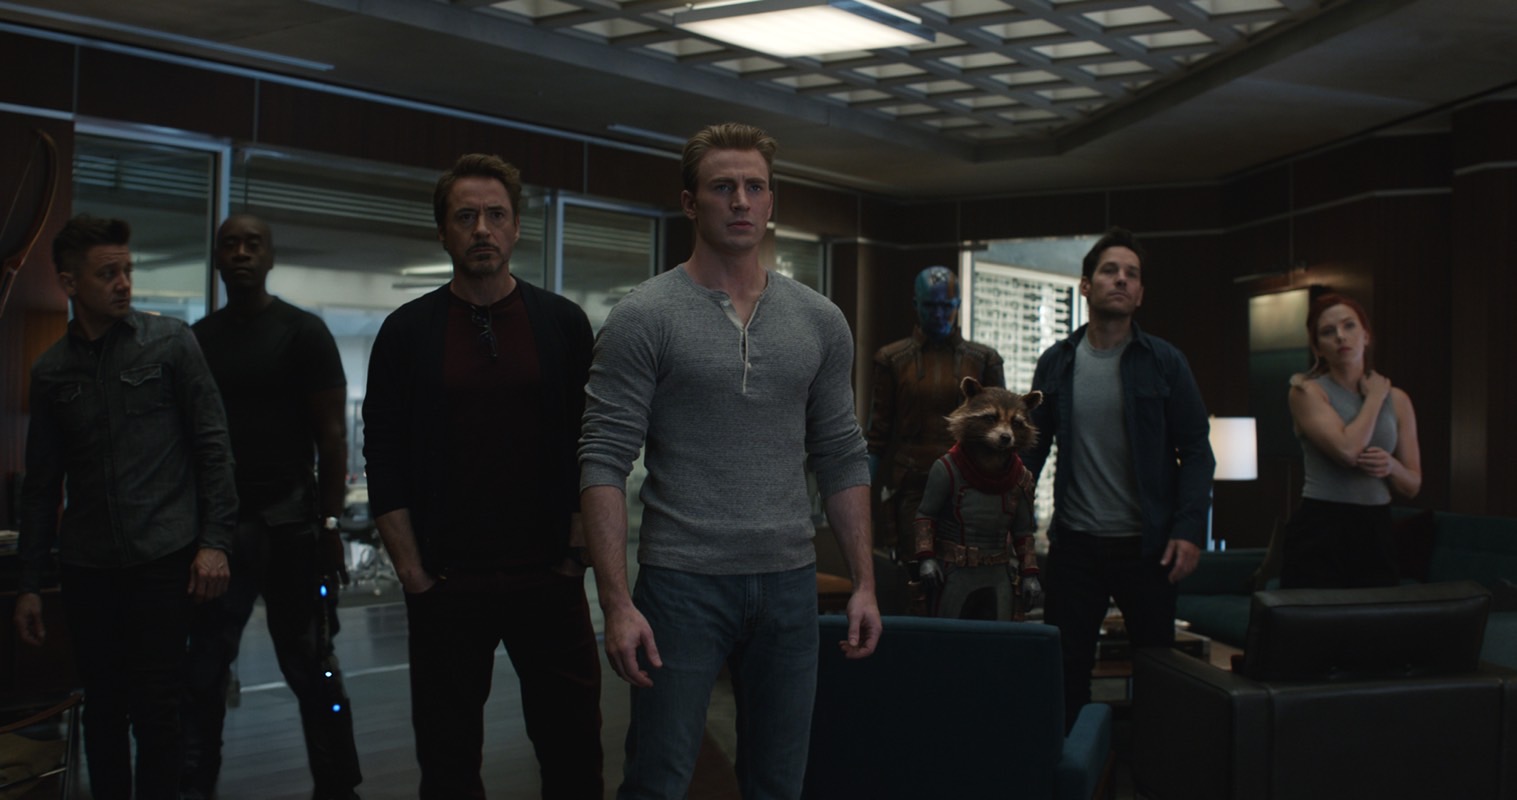 Endgame is the ‘final Avengers movie’